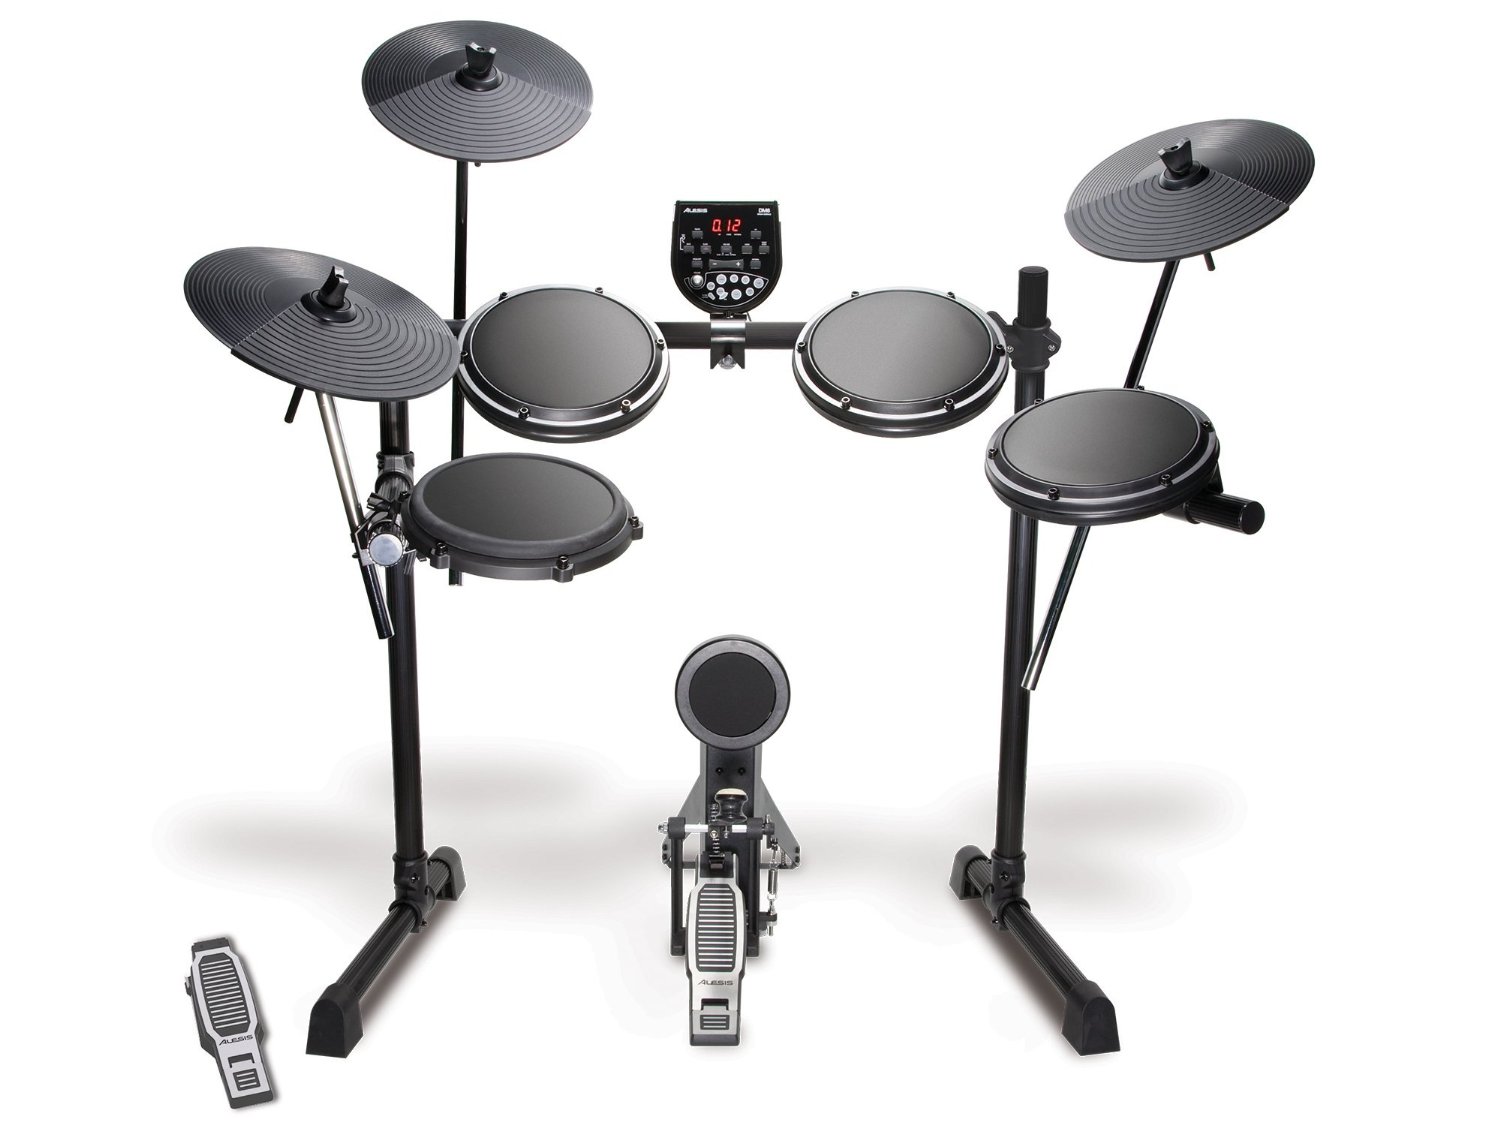 Top 5 Electronic Drum Sets